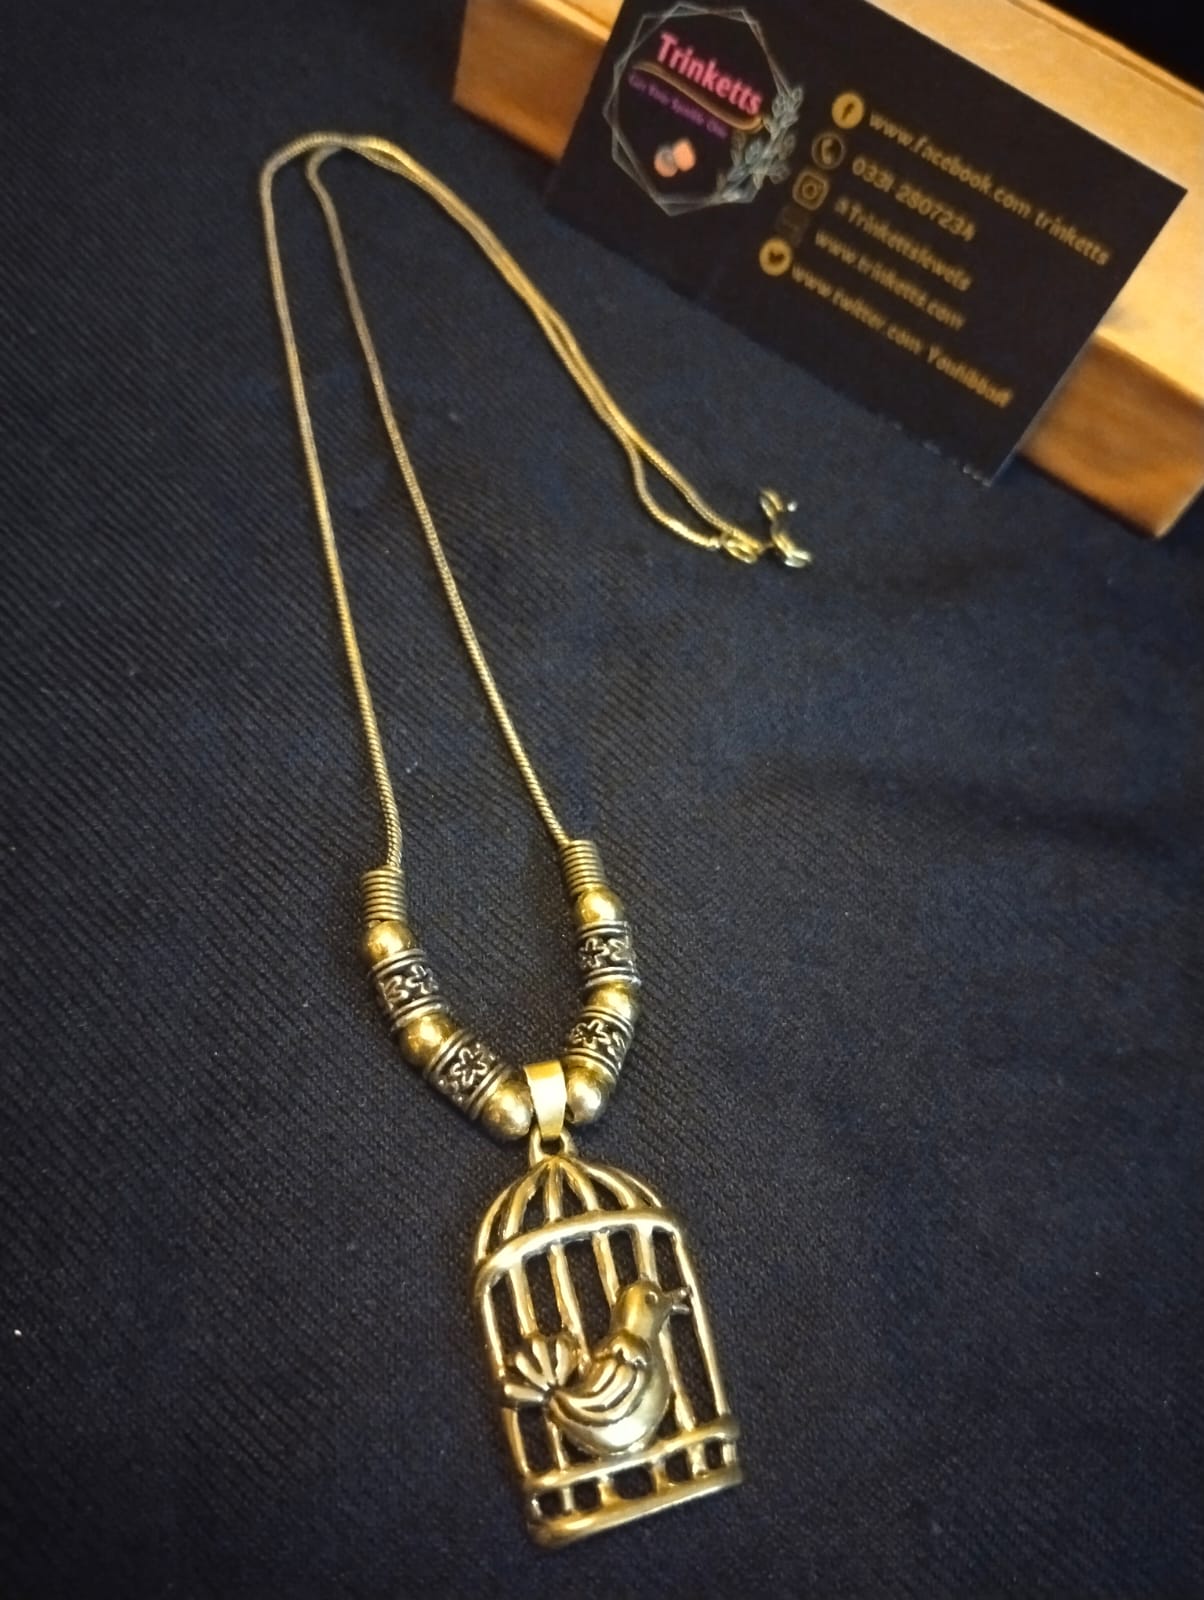 Full Oxidized Golden and Silver Maala Pendant with Chain: A captivating pendant with an intricate cage-style design, featuring a delicate bird motif suspended within, accompanied by an elegantly matching chain